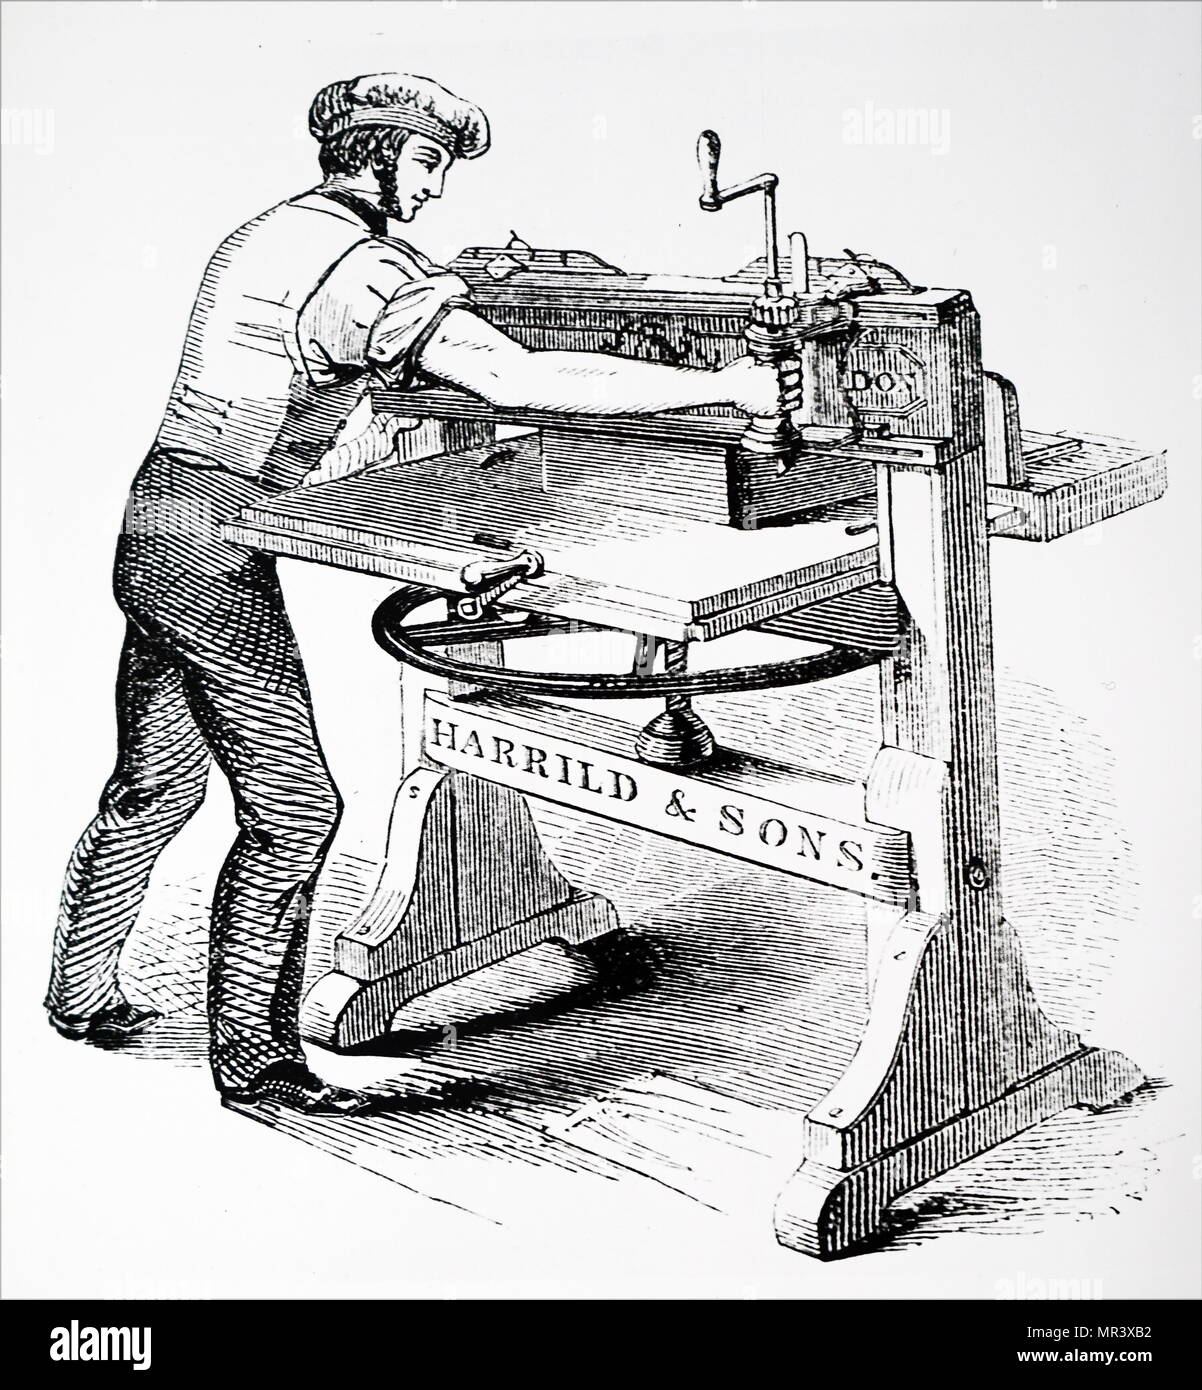 Engraving depicting the Columbian hand printing press, invented by George Clymer. Power was applied to the plate by means of a compound lever. George Clymer (1739-1813) an American politician, inventor, and Found Father of the United States. Dated 19th century Stock Photo